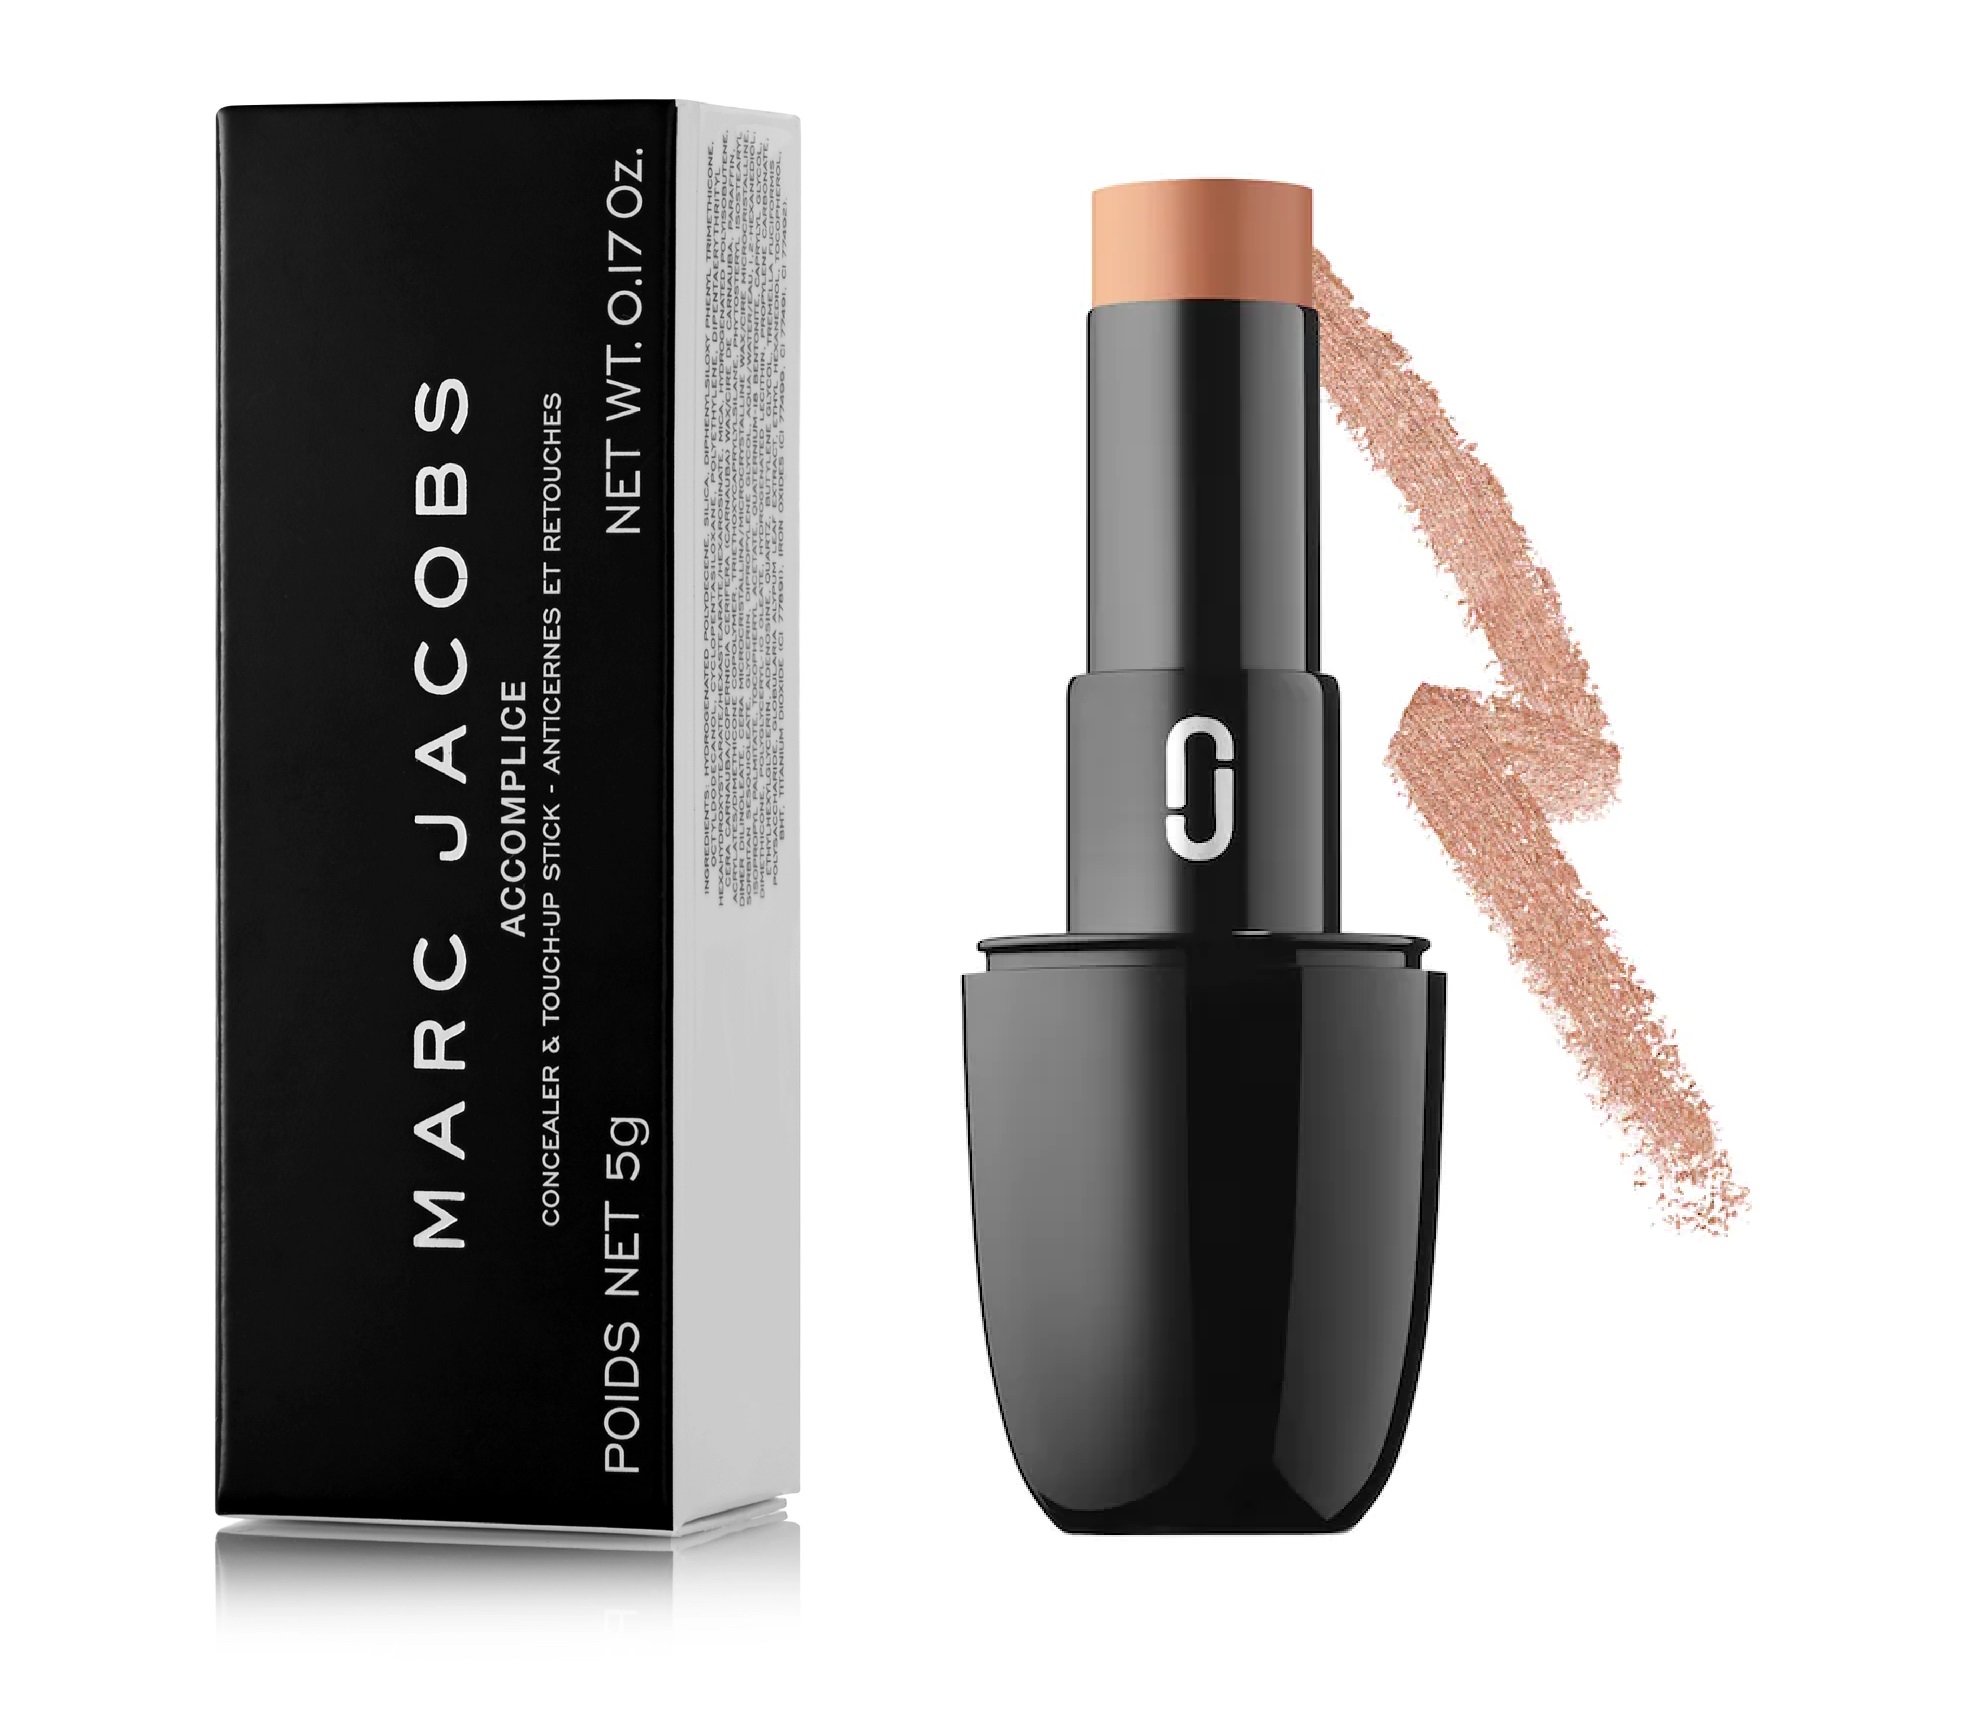 Marc Jacobs Accomplice Concealer and Touch-Up Stick Tan 43 - image 1 of 3